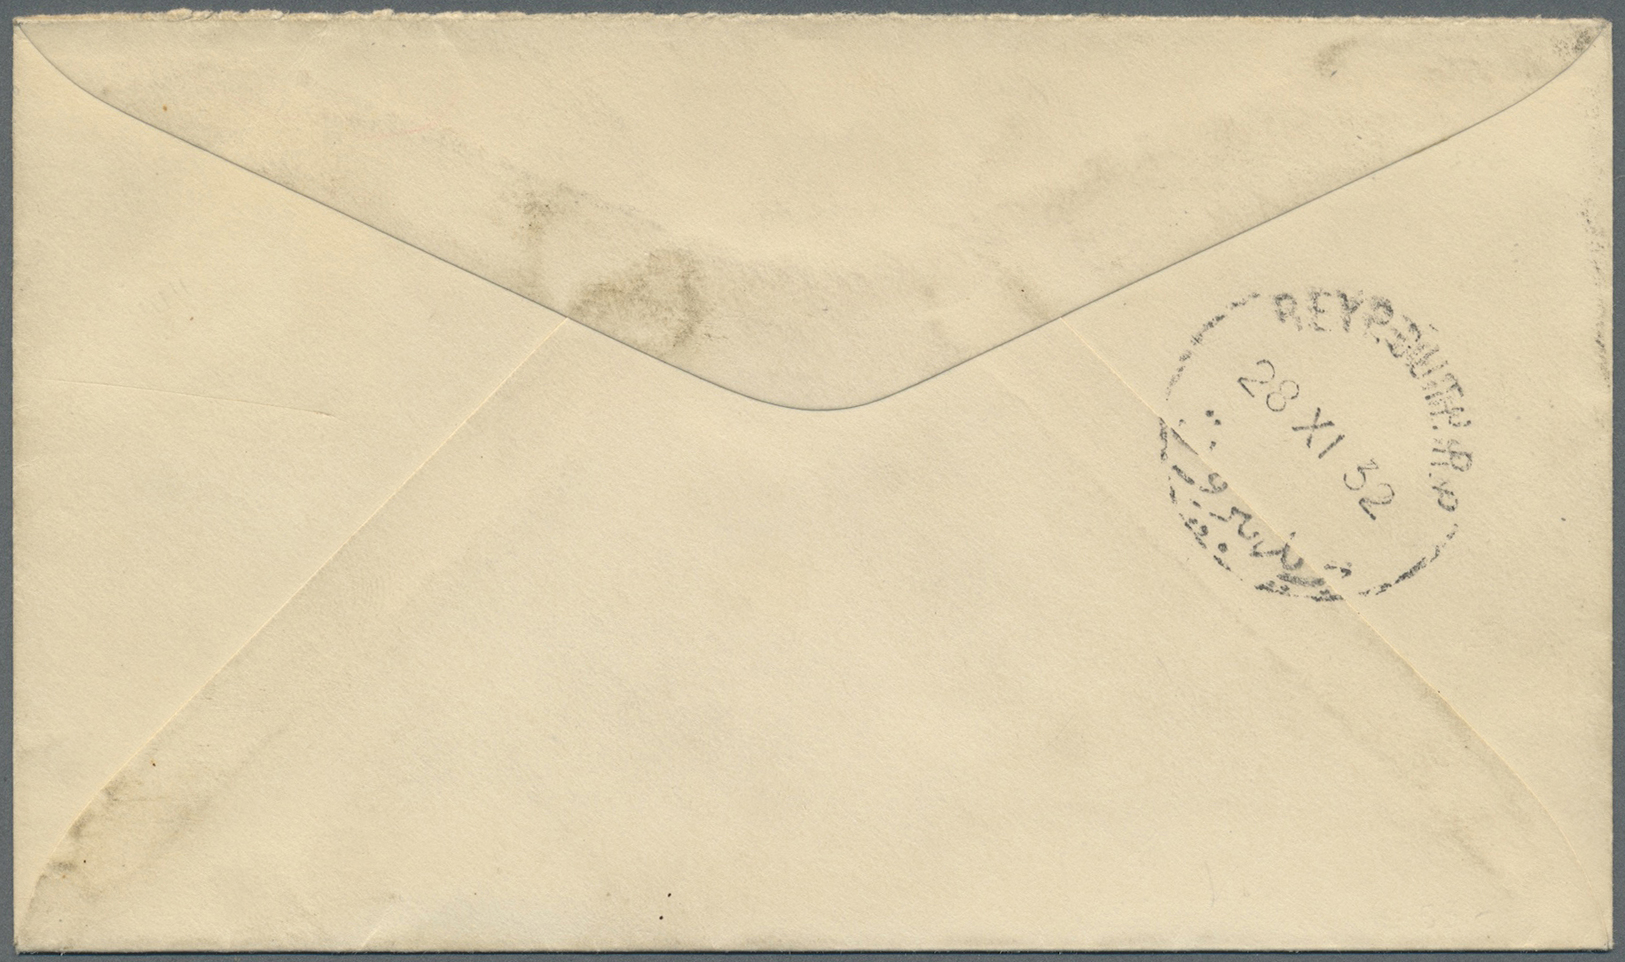 Br Ägypten: 1932 SHIP MAIL: "S.S. TAIF / KHEDIVIAL MAIL LINE" Large Oval H/s In Violet On Cover Addressed To Ashland, Pe - 1915-1921 British Protectorate